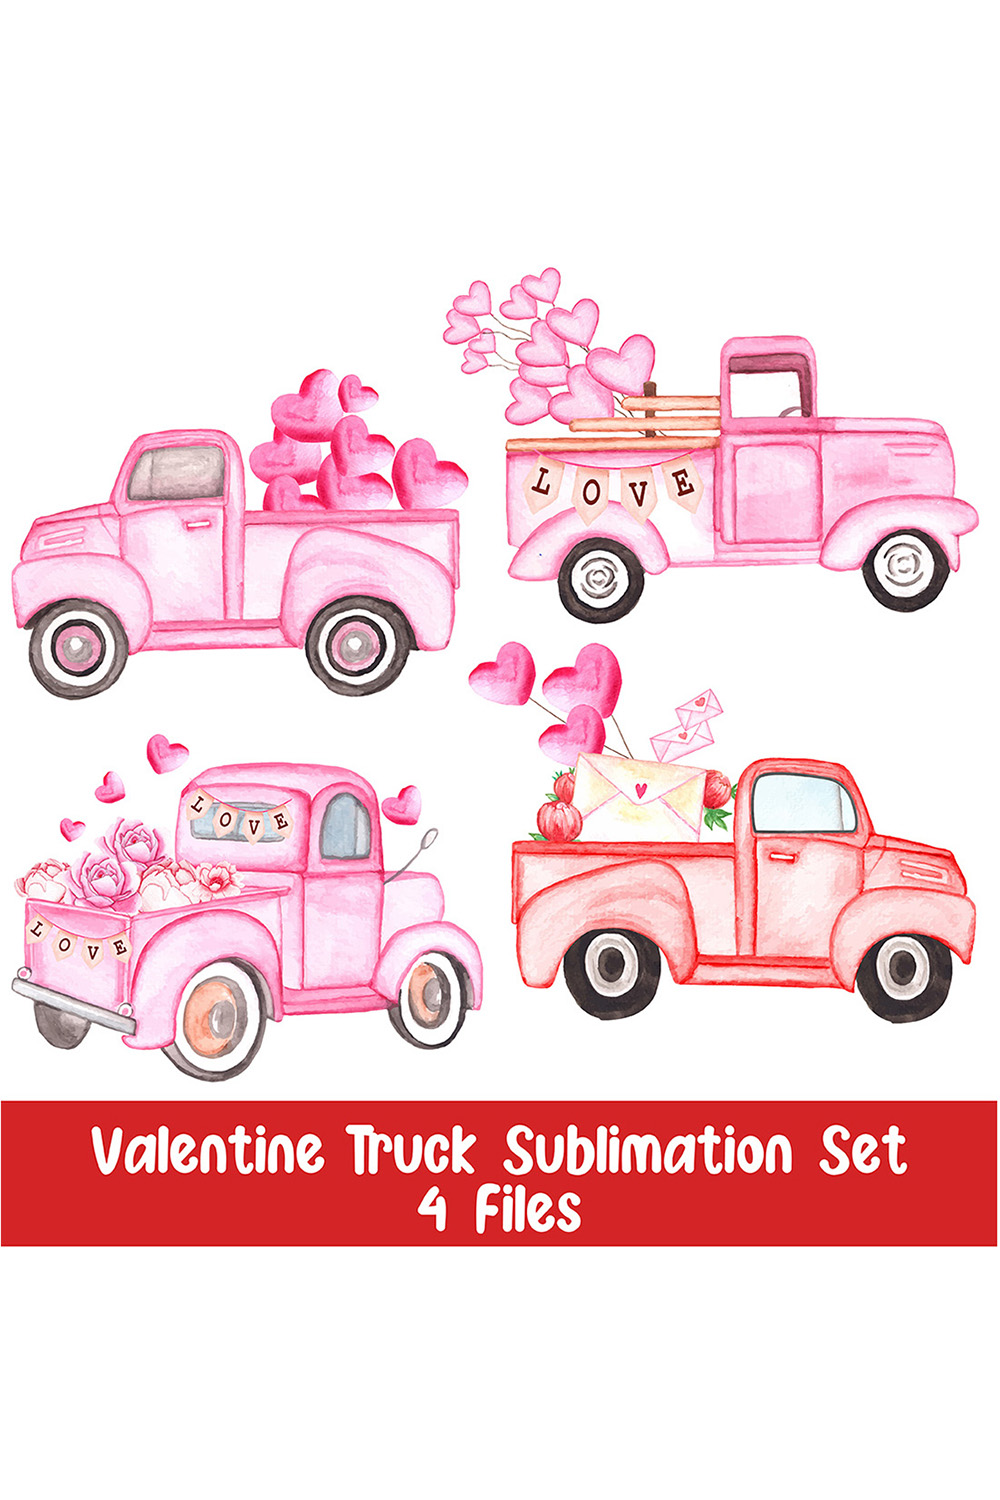 A pack of gorgeous watercolor images of pink trucks